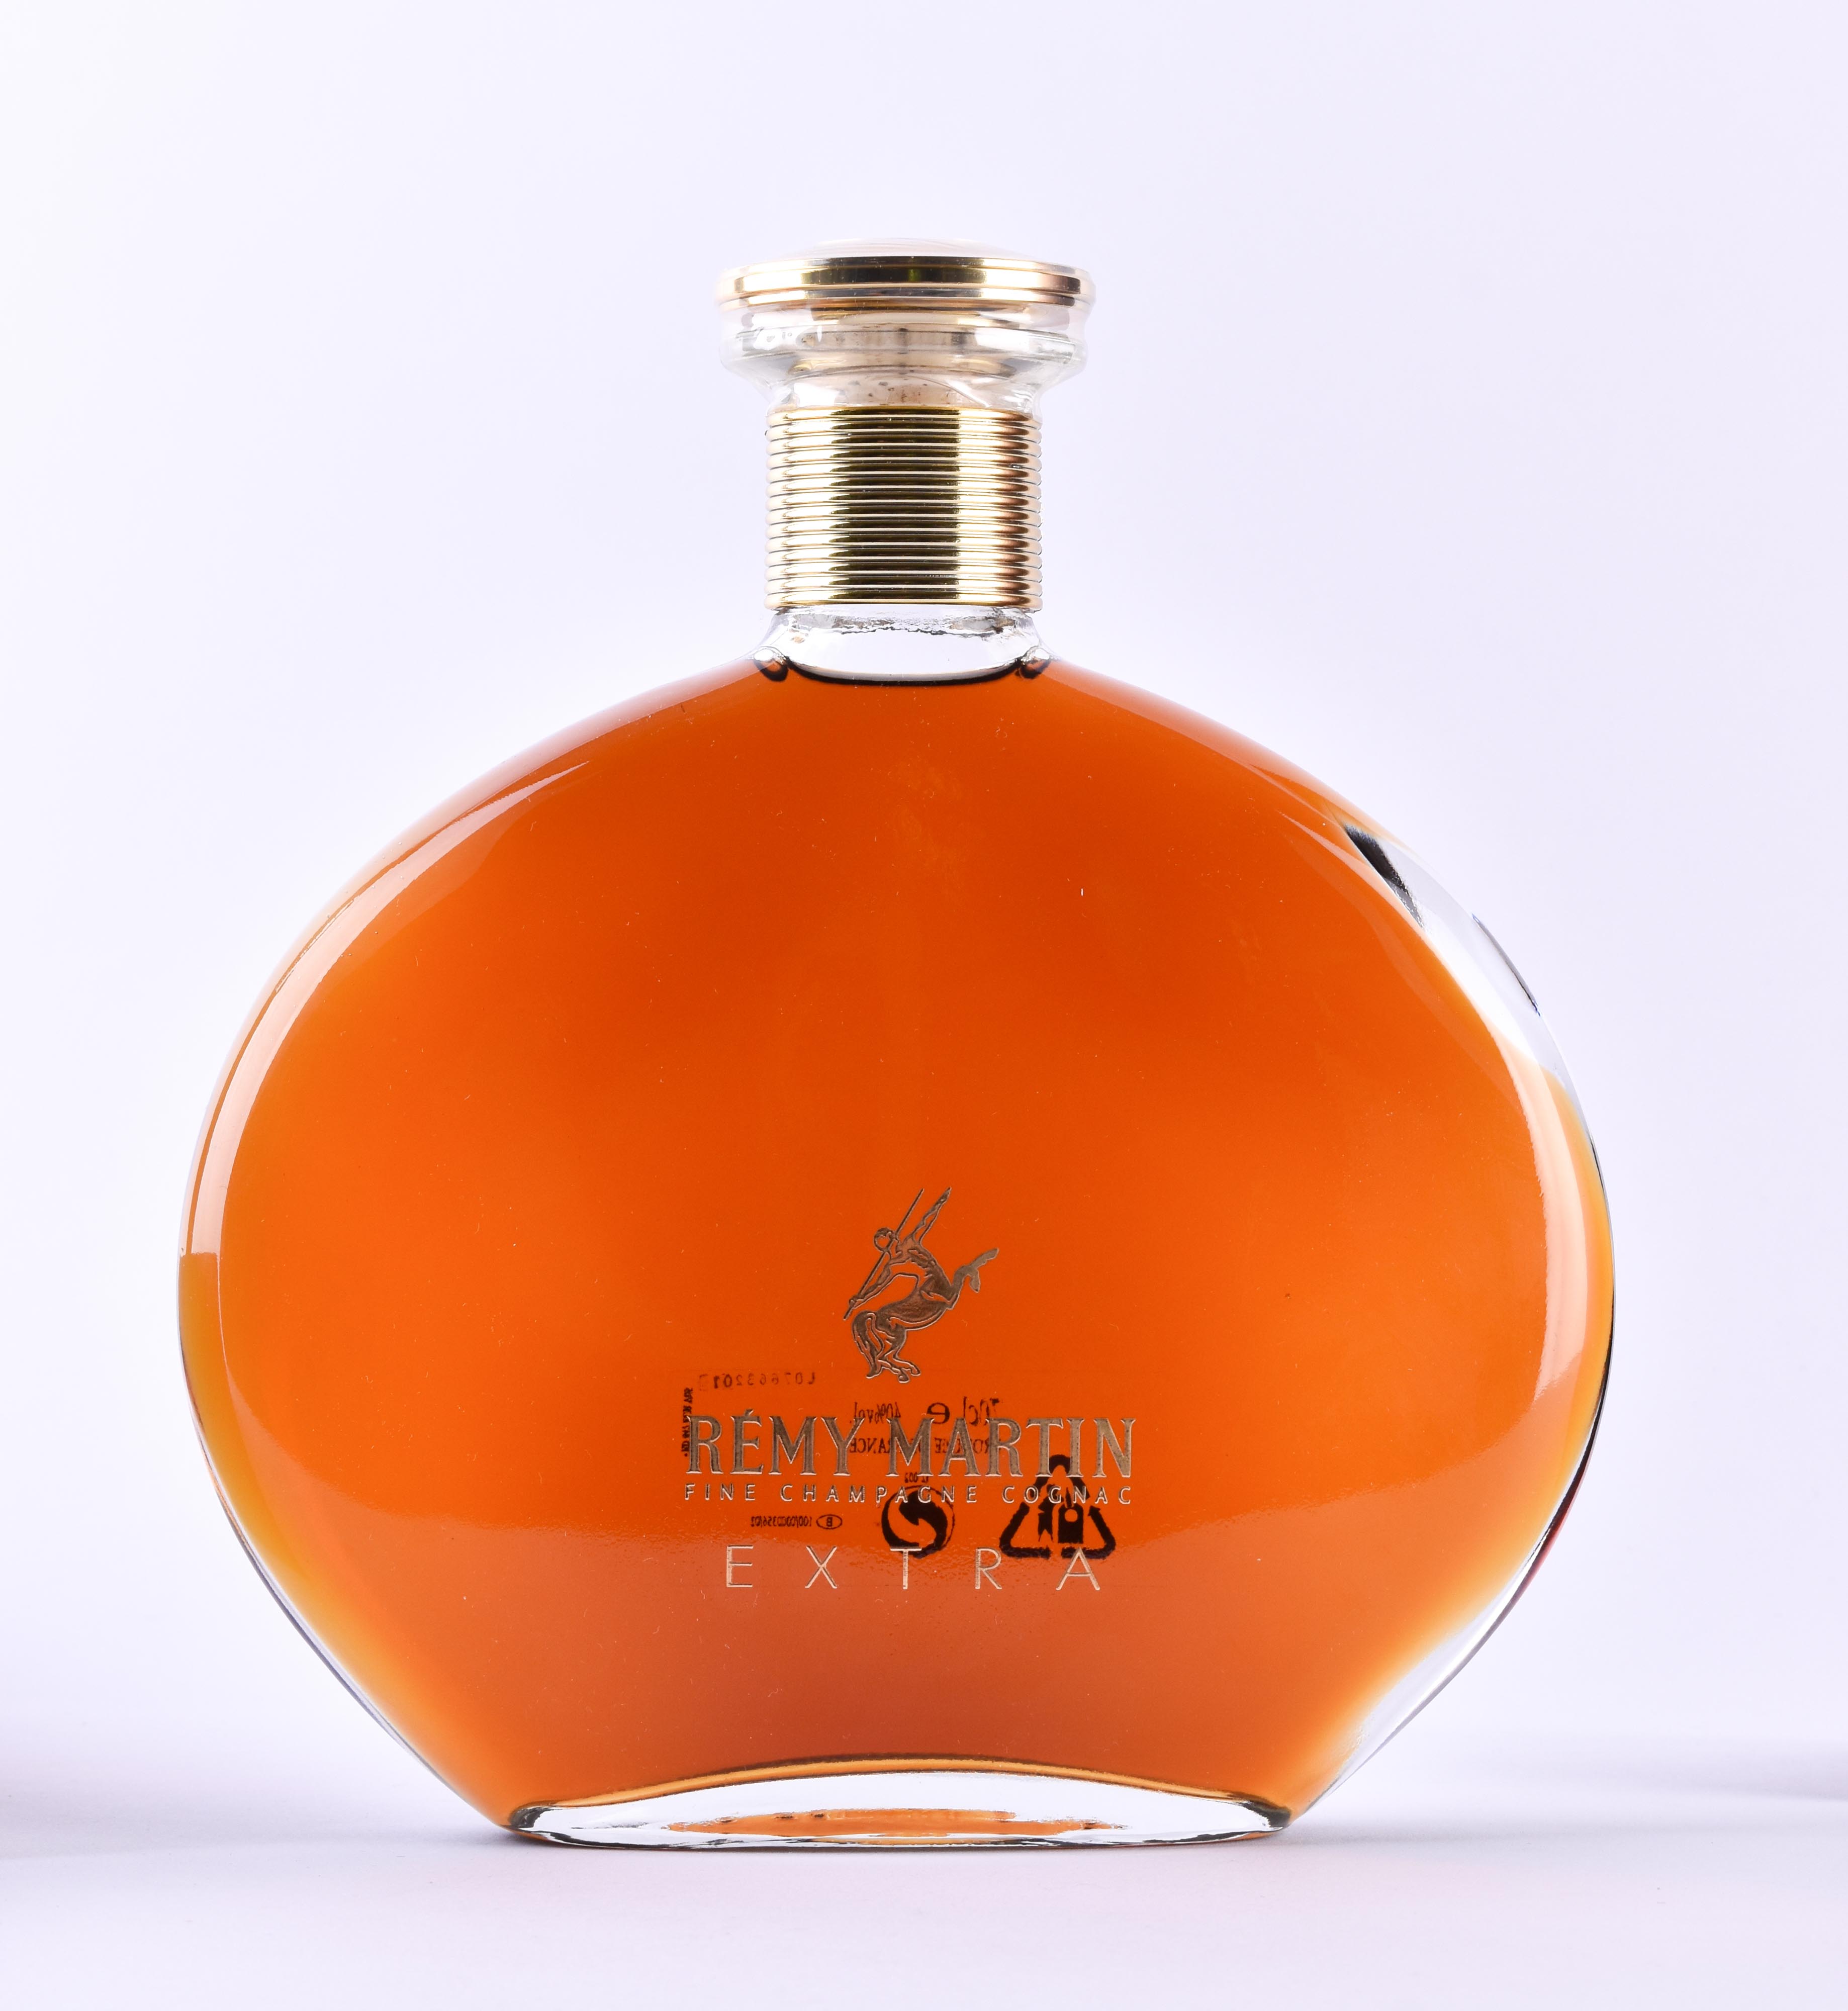 Rémy Martin - Fine Champagne Cognac Extra - Image 2 of 3